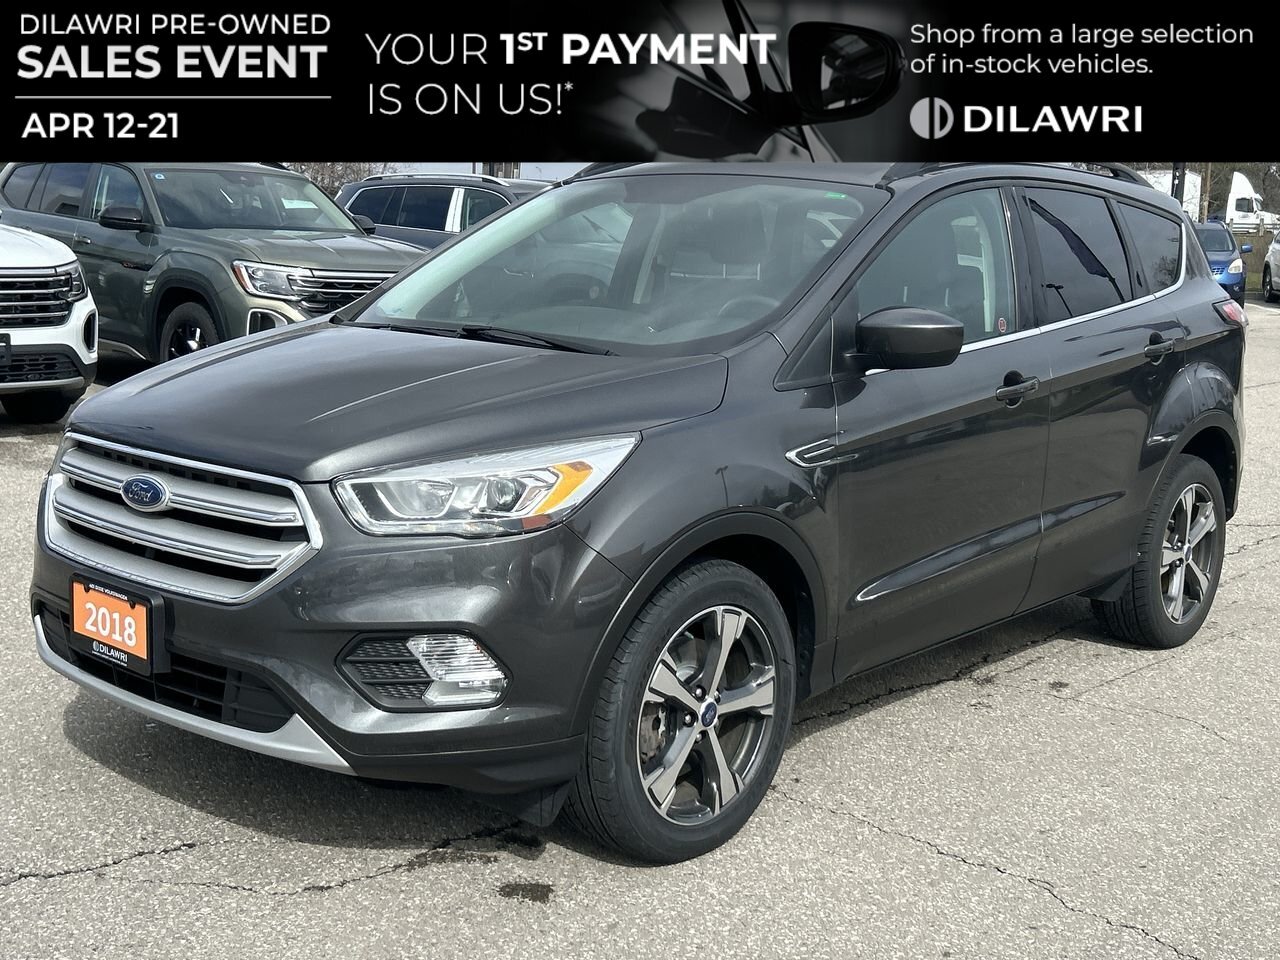 2018 Ford Escape SEL Clean Carfax| AWD| Alloy Wheels| Heated Seats|